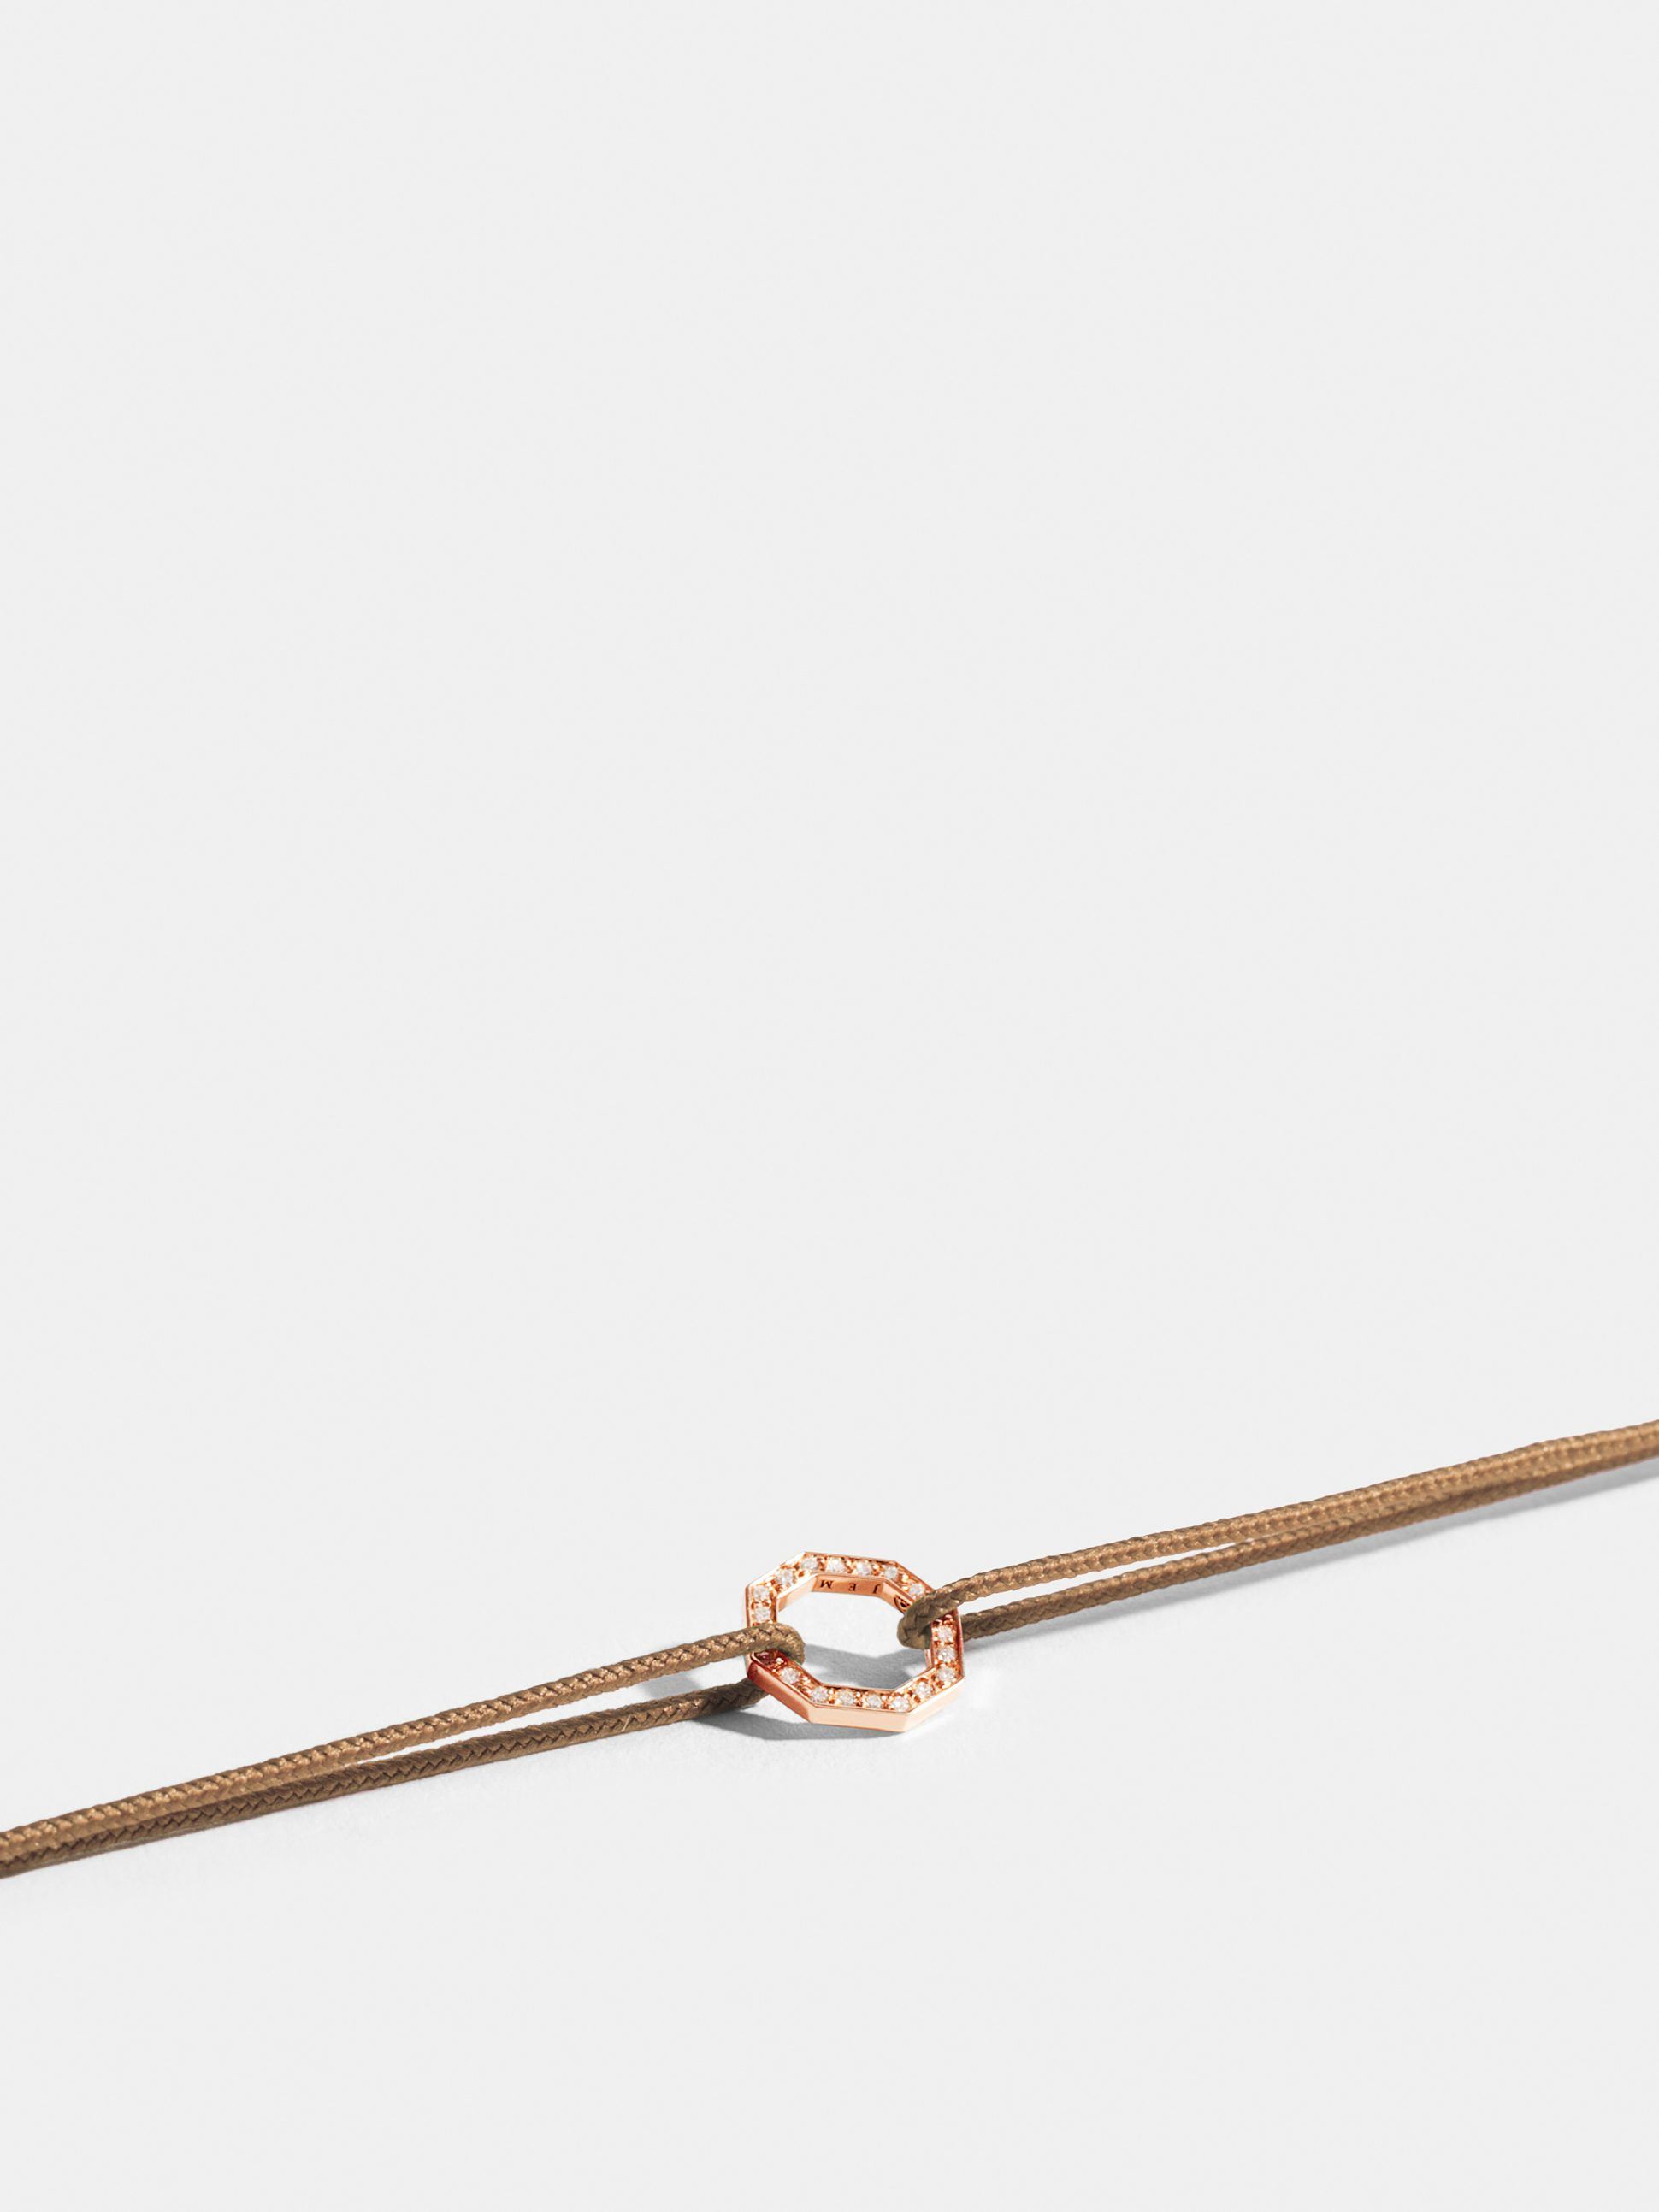 Octogone motif in 18k Fairmined ethical rose gold, paved with lab-grown diamonds, on a honey yellow cord.